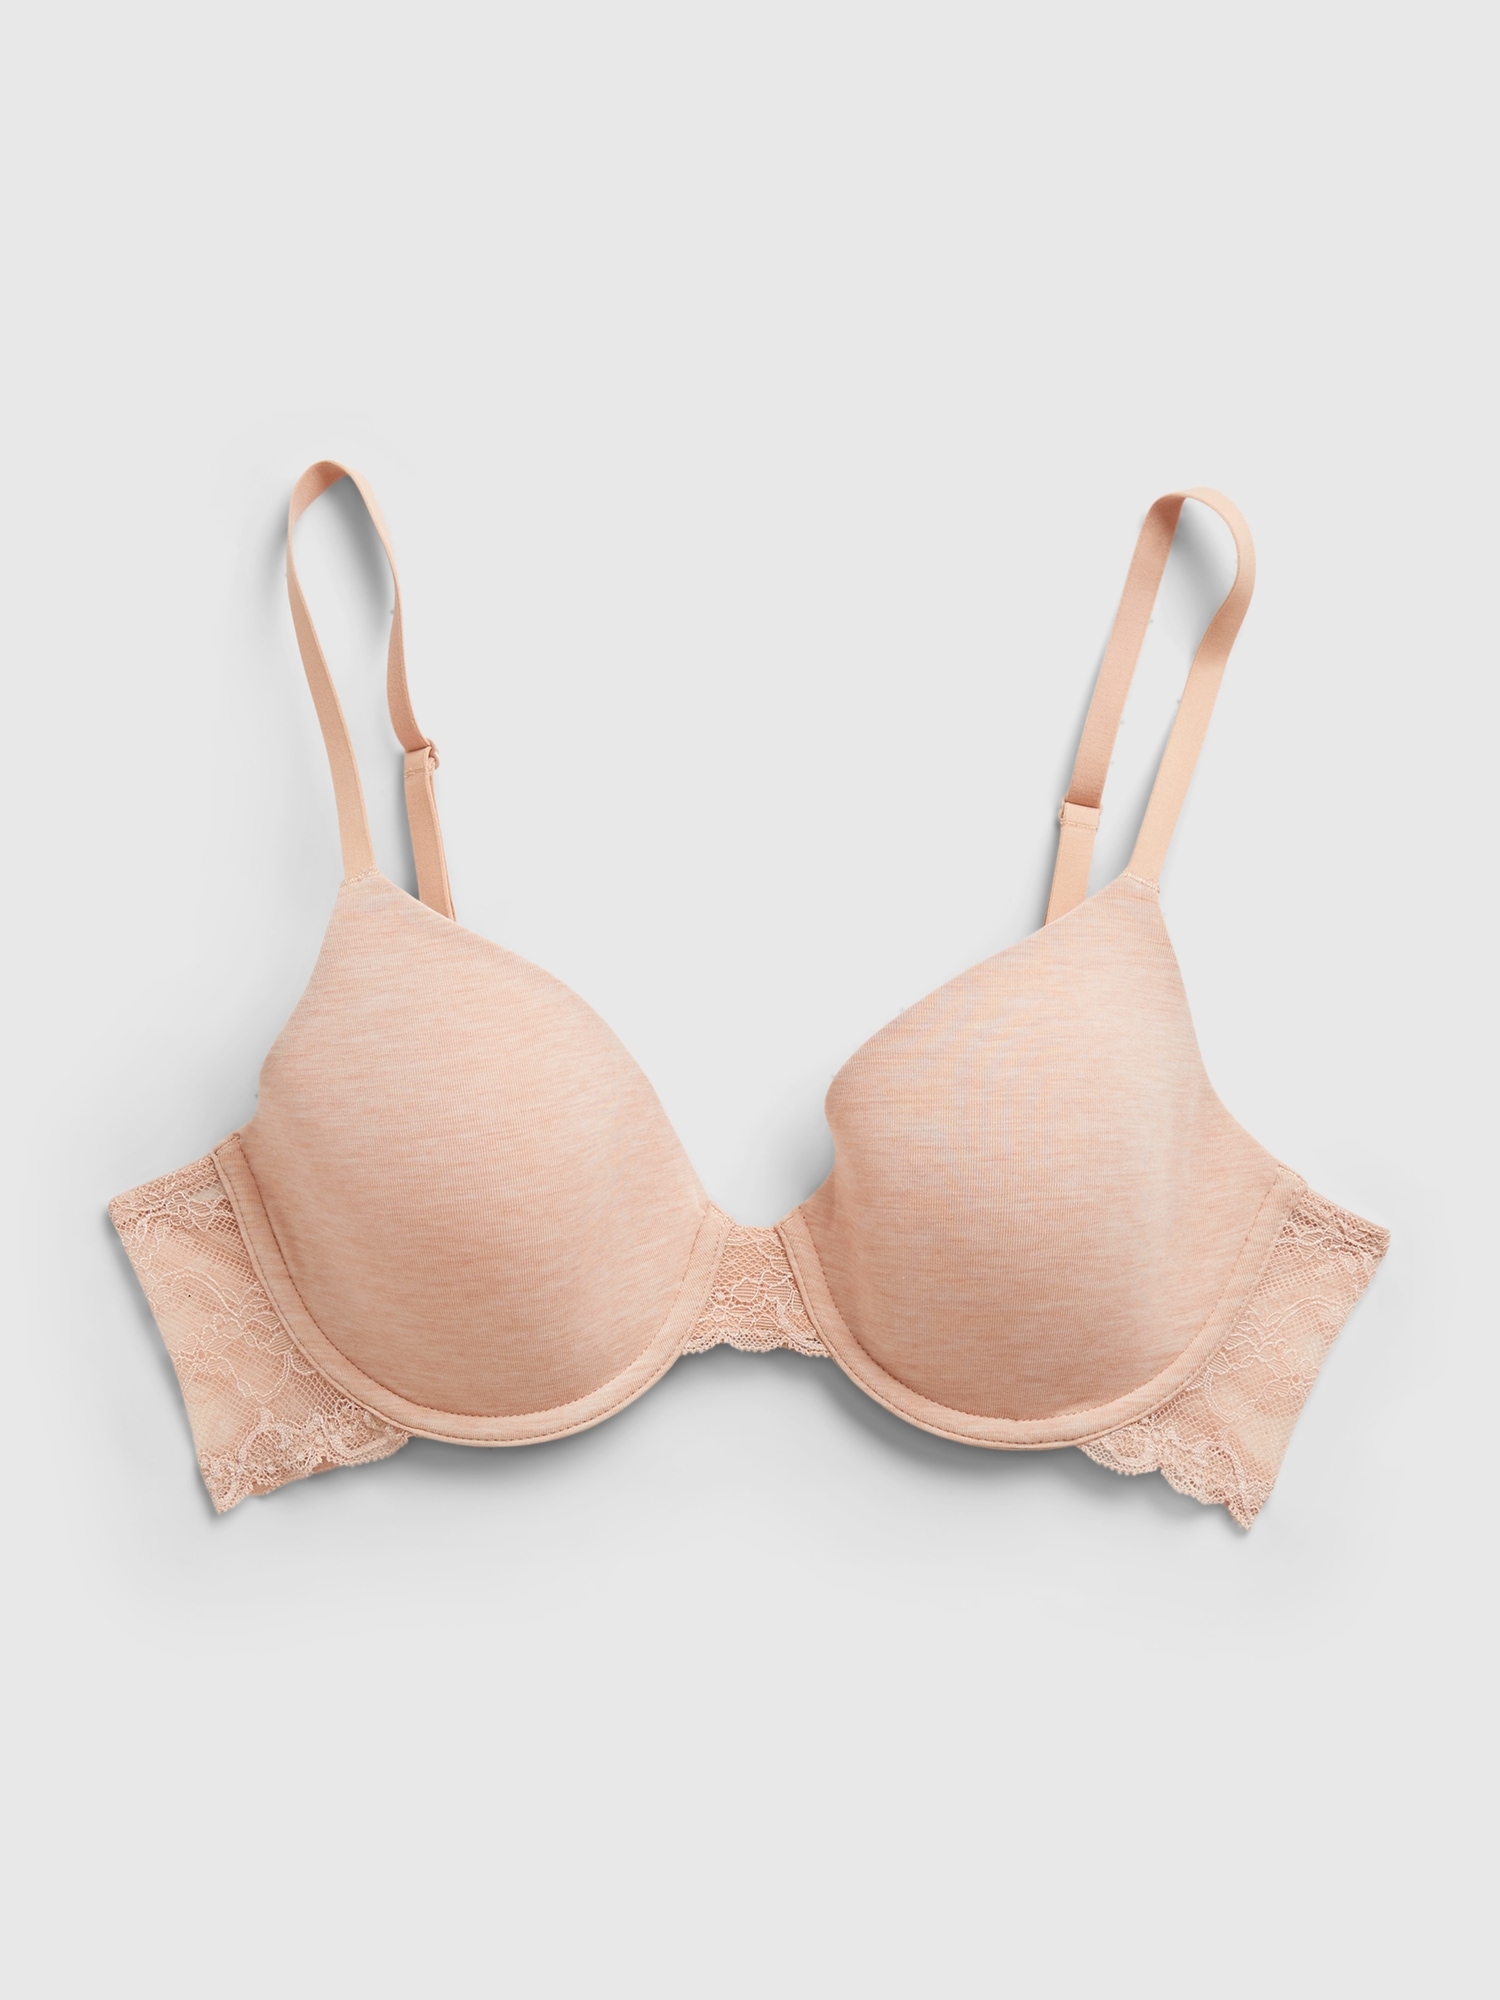 Vintage Mesh Sweetheart Push-Up Bra A-DD, Limited Collection